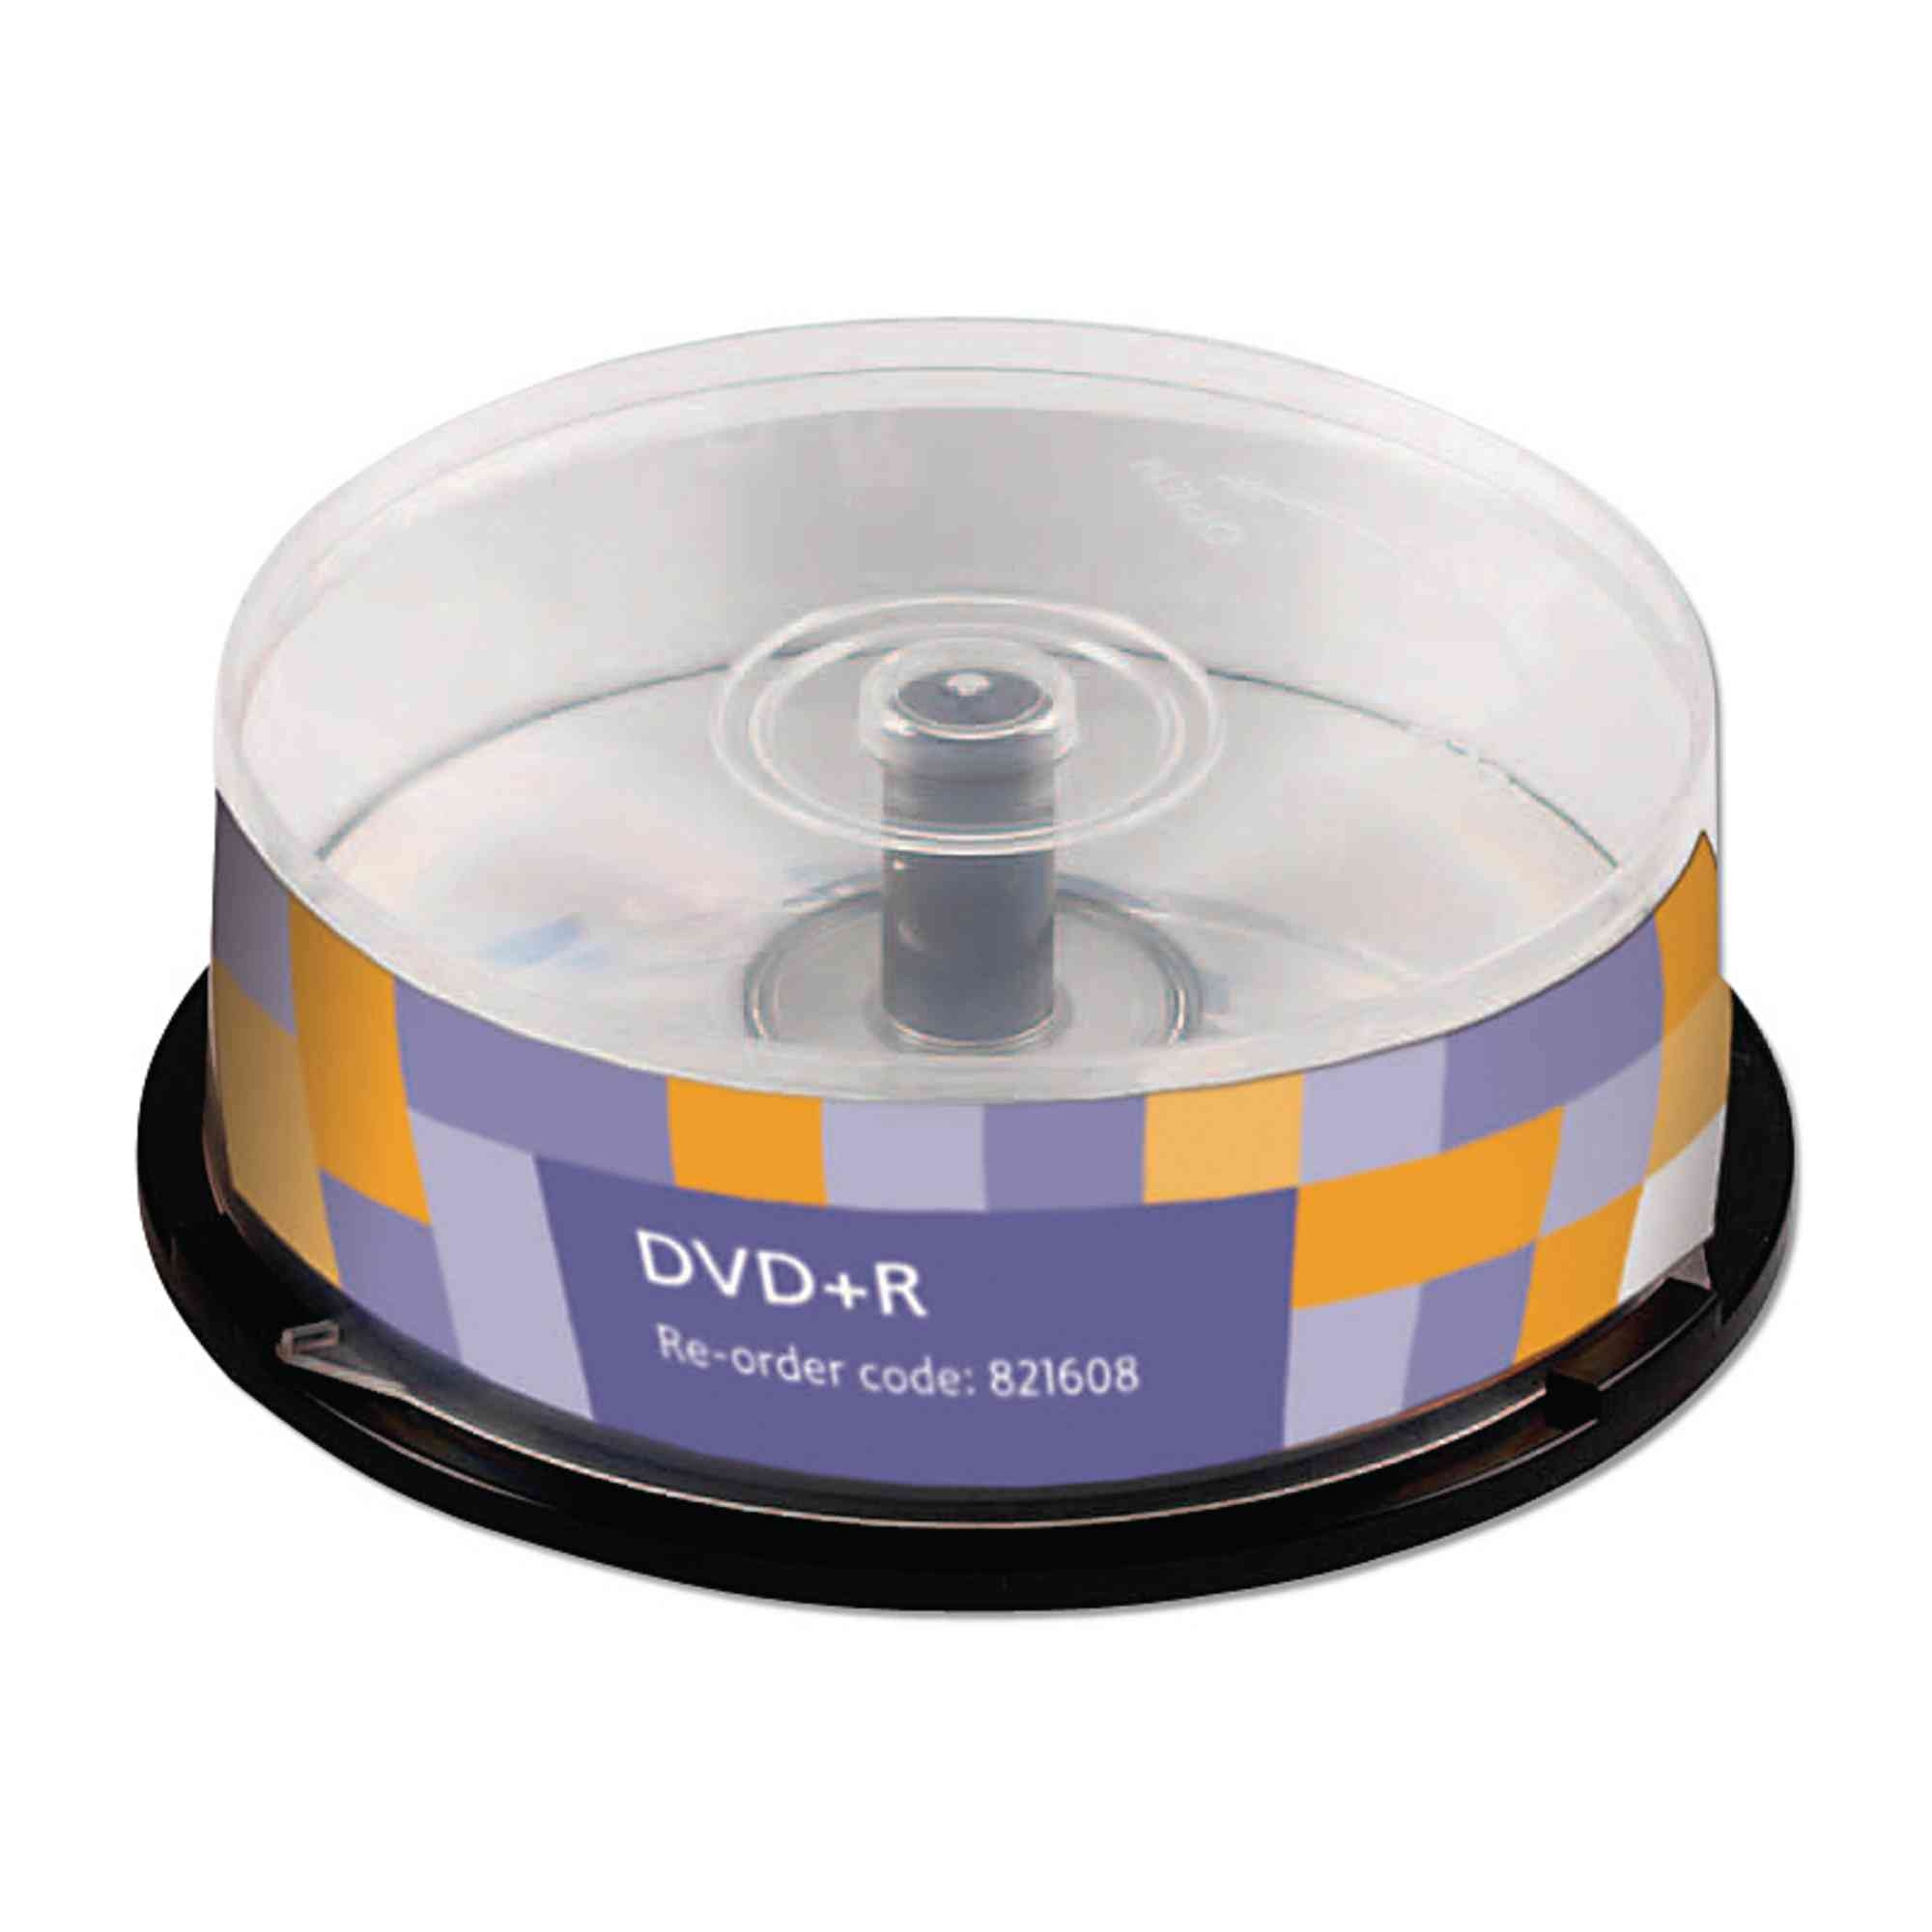 Recordable DVD Spindle - DVD -